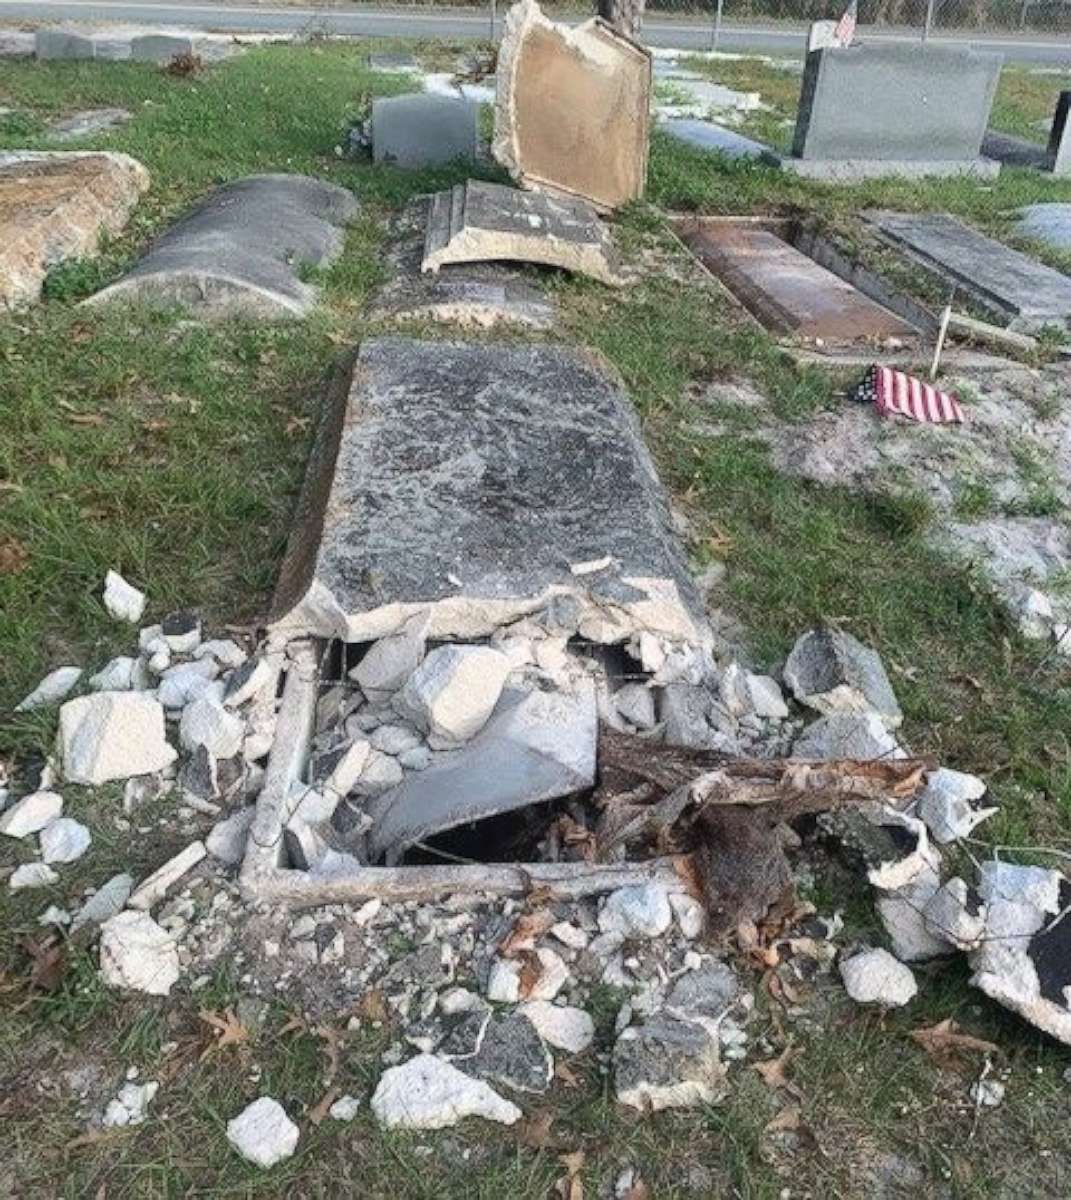 PHOTO: On Dec. 6, 2020, four graves at the Edgewood Cemetery in Mount Dora, Florida, were discovered to have been disturbed and, according to the Polk County Sheriff’s Office, a crowbar had been used to remove the lids of the tombs.